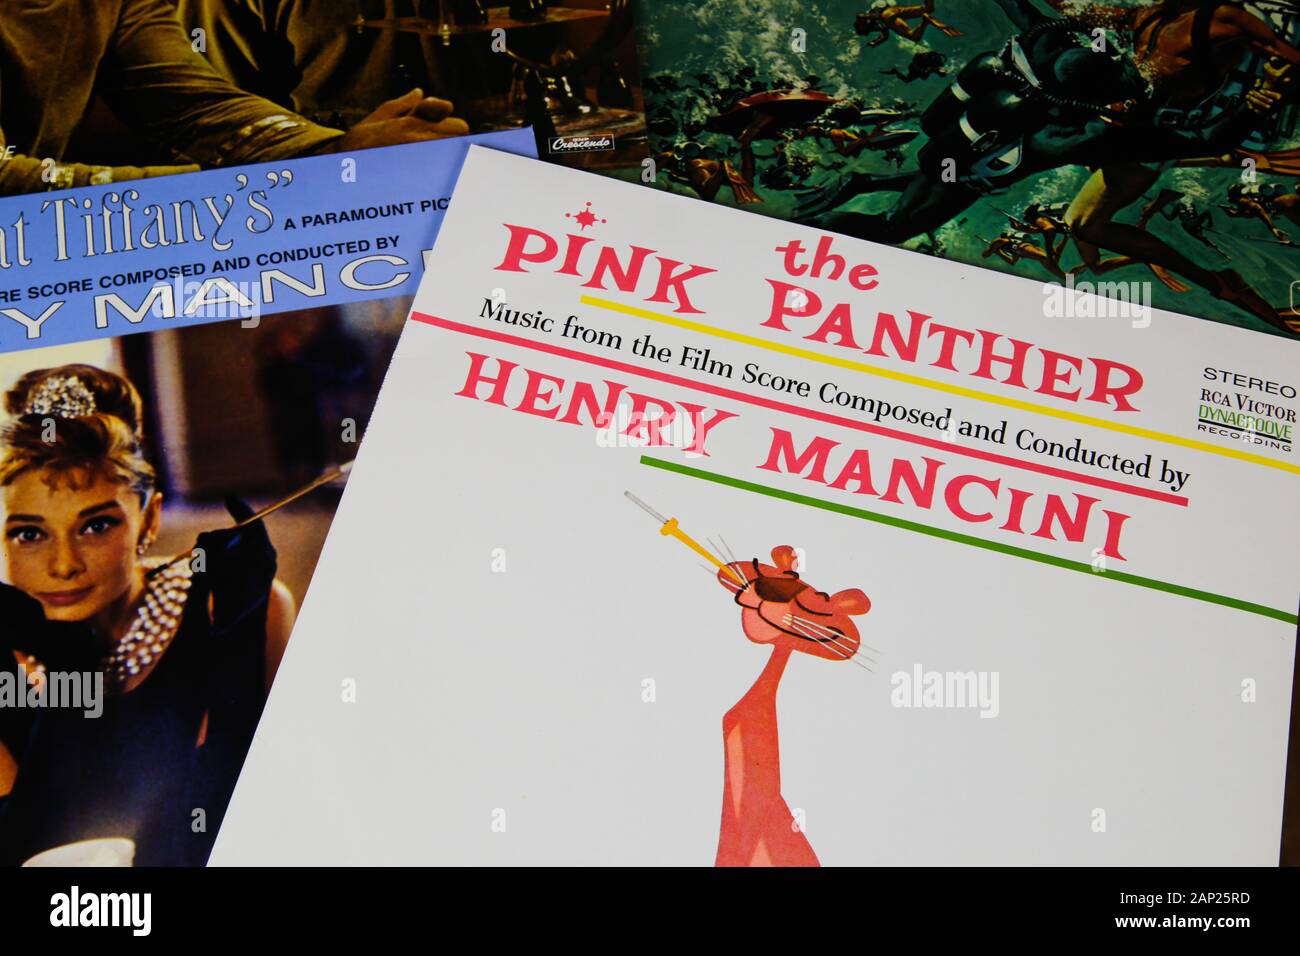 Viersen, Germany - 3. January 2020: Close up of old movie soundtrack vinyl record album covers with focus Henry Mancini Pink Panther Stock Photo